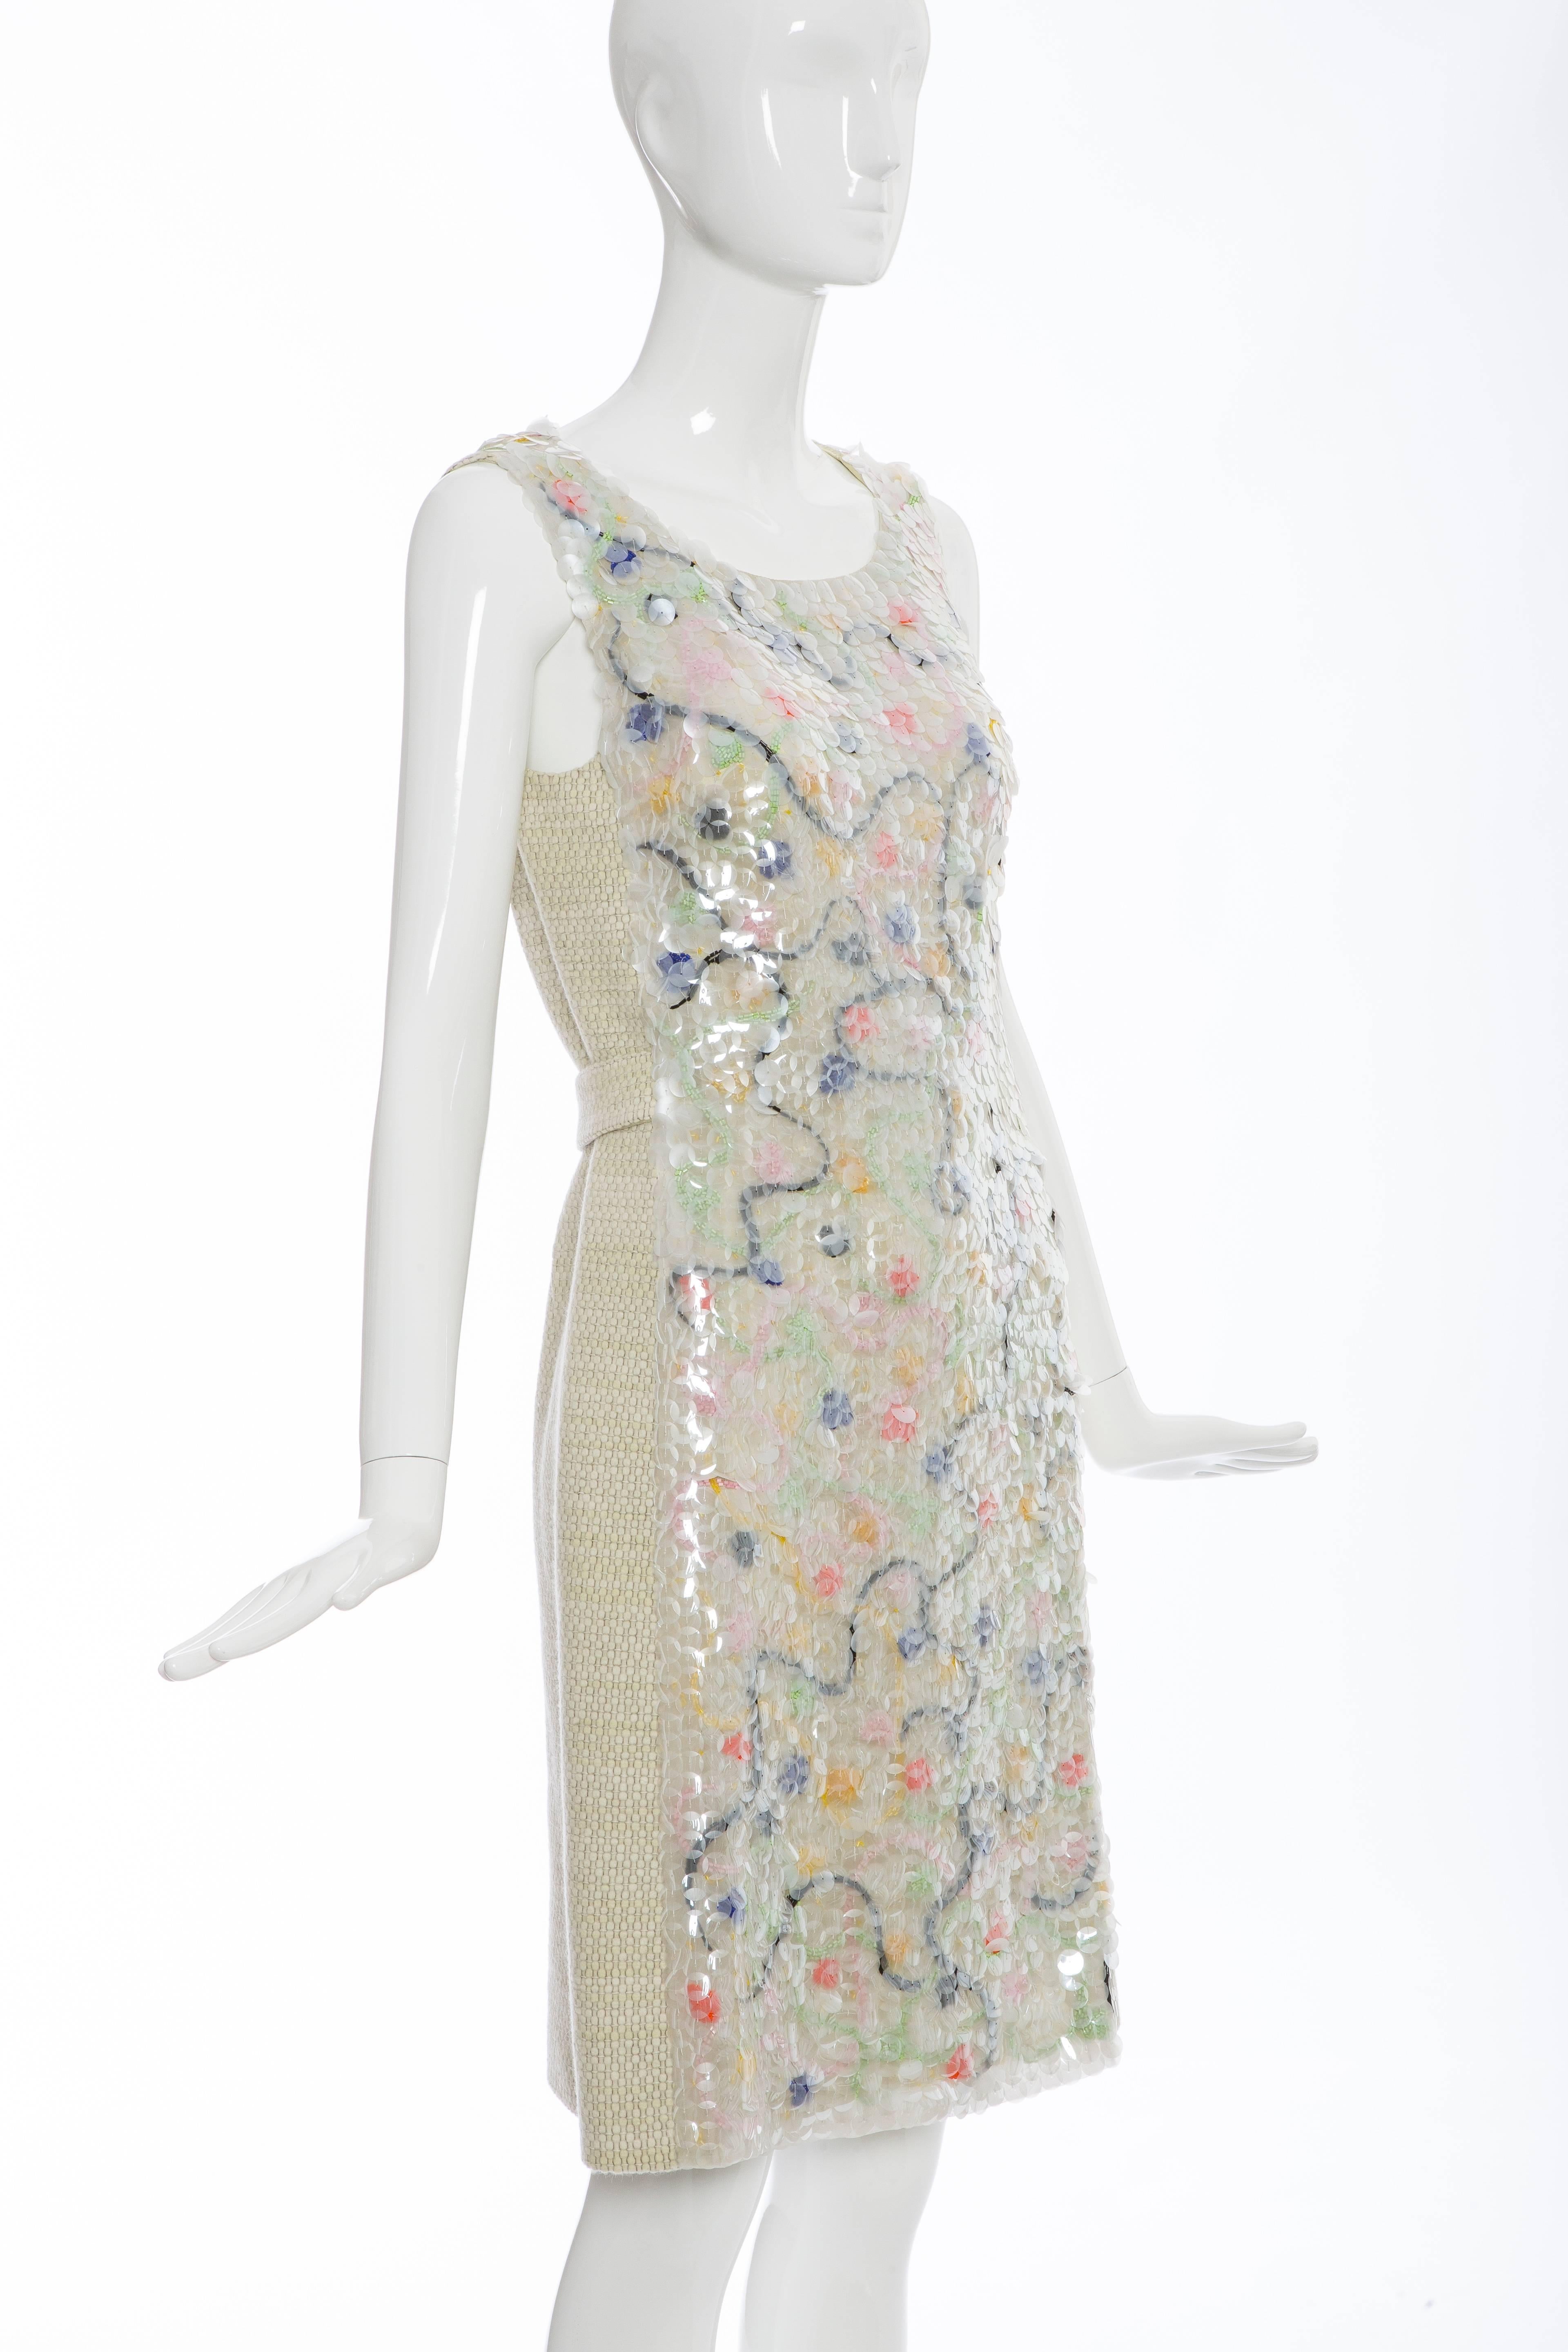 Women's Chanel Wool Tweed Dress Clear Paillettes & Bead Embroidery, Fall 2001